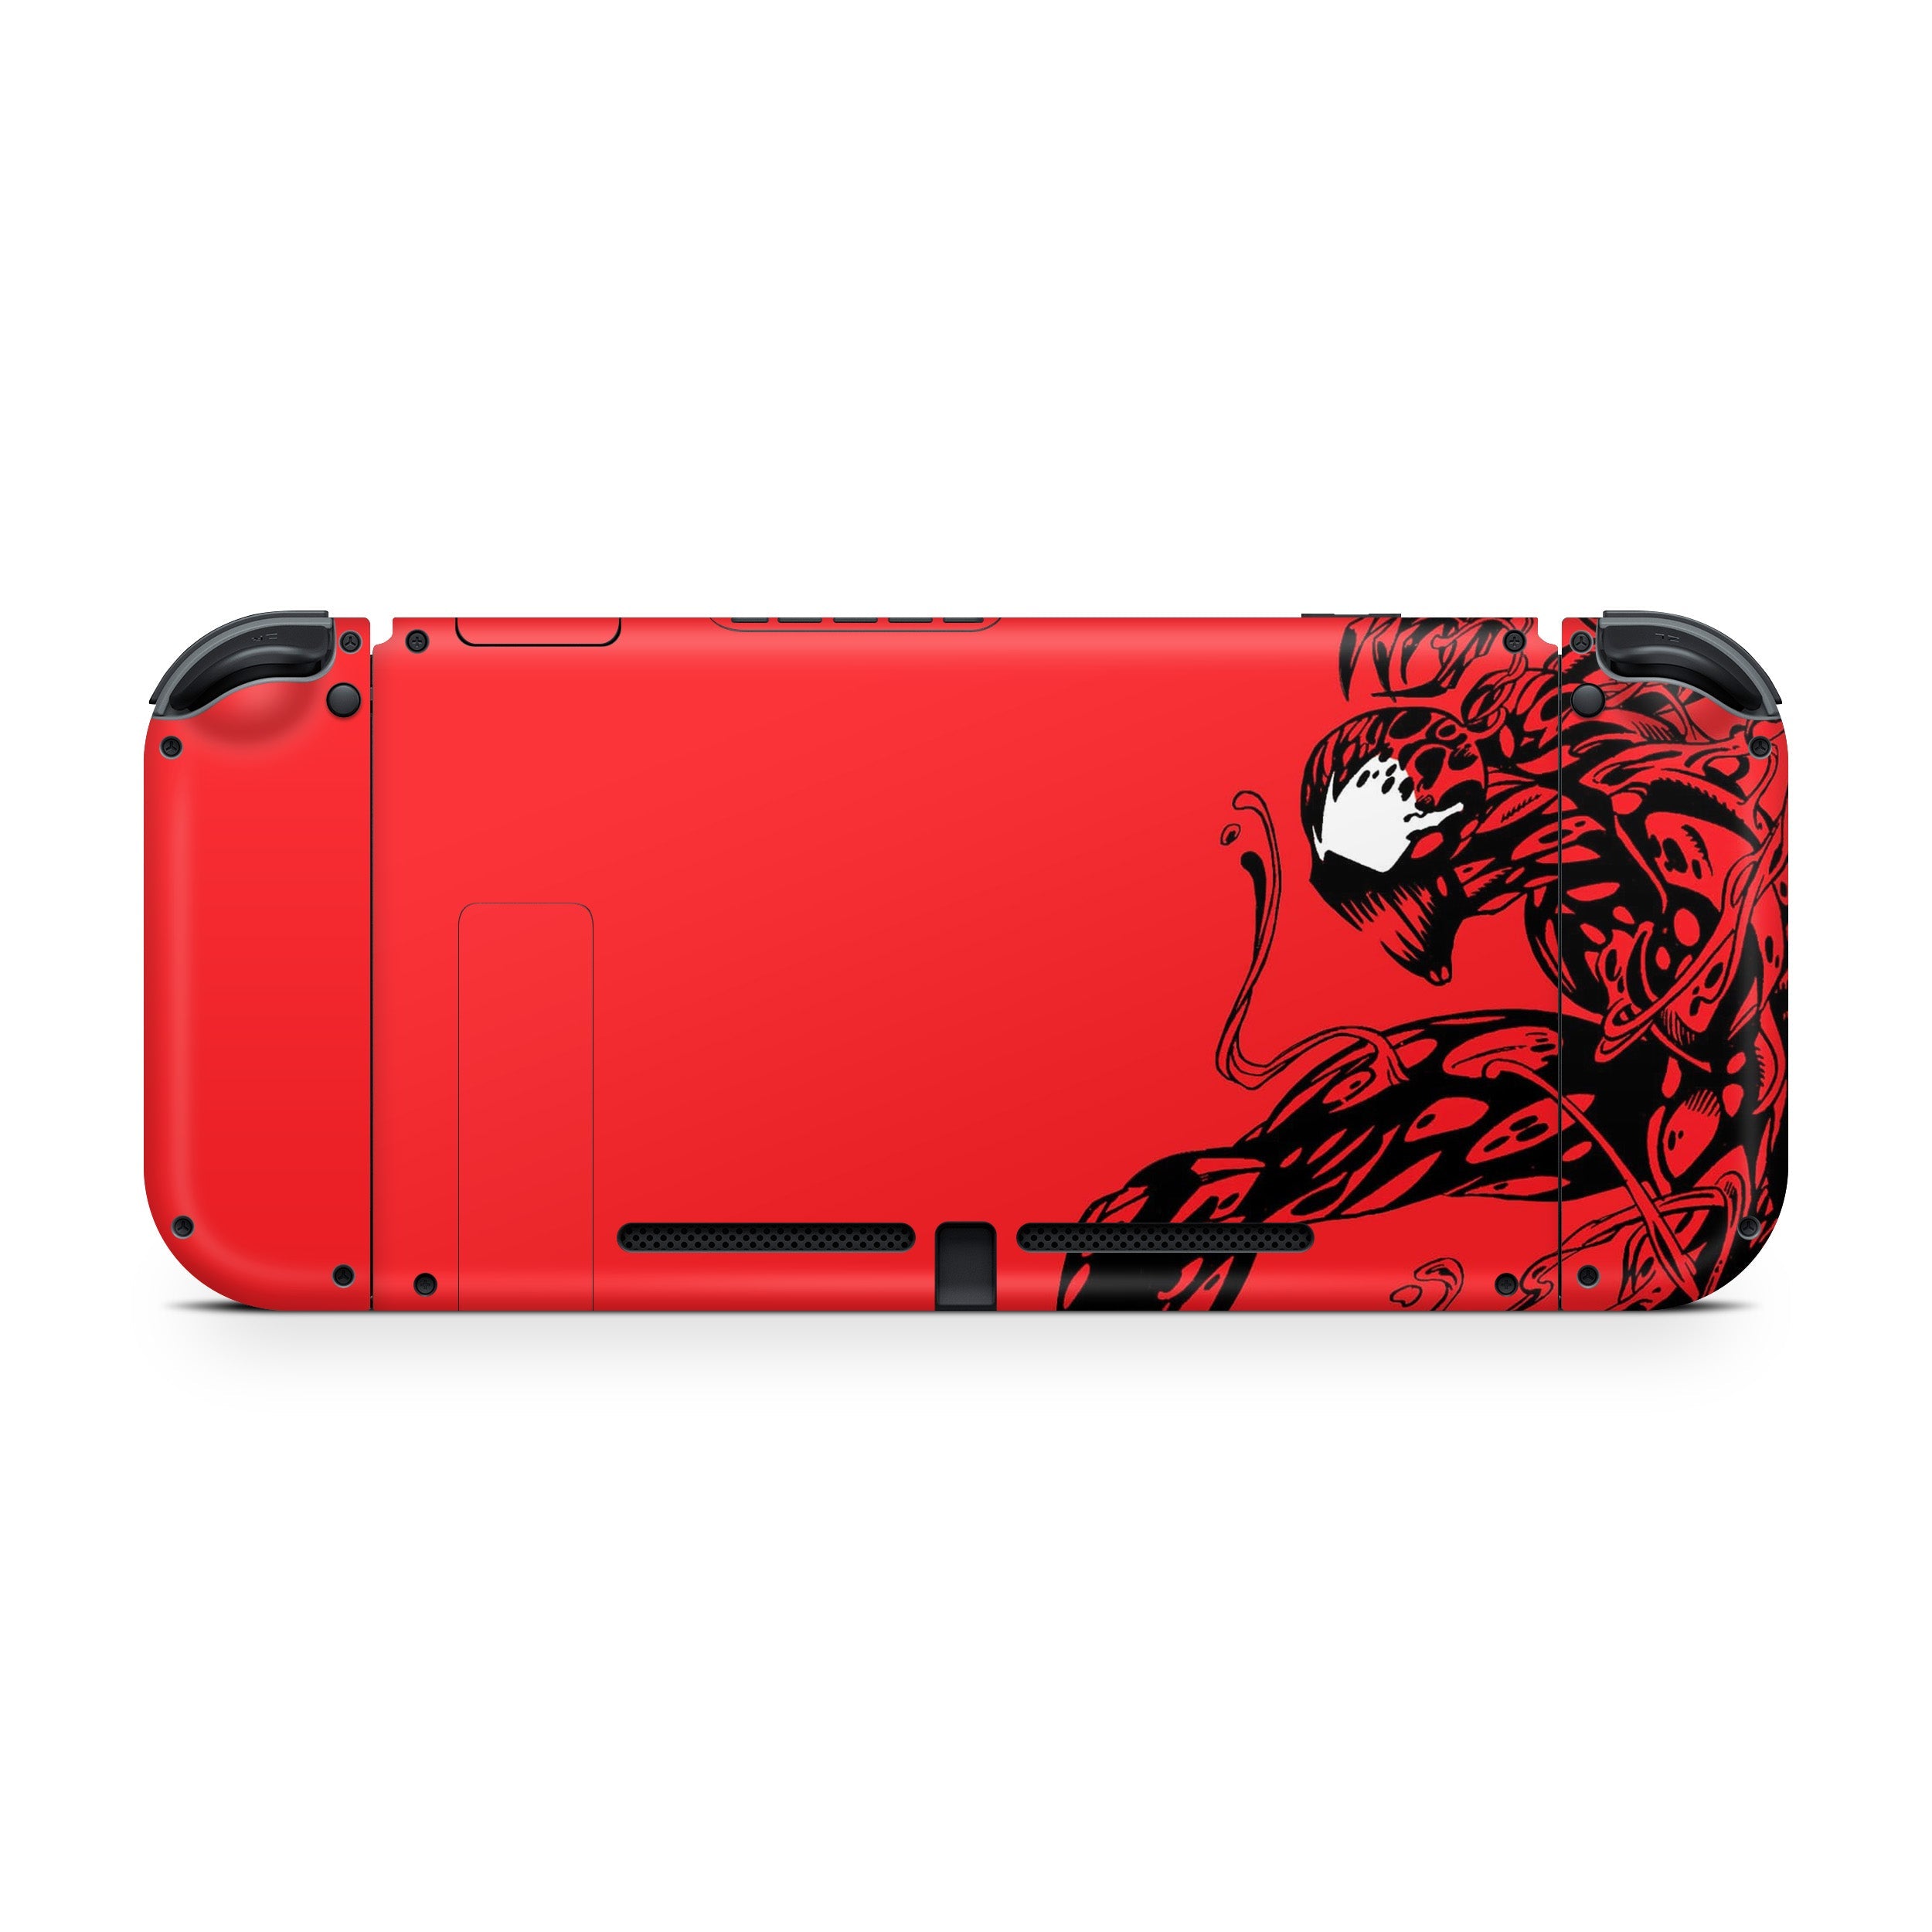 A video game skin featuring a Marvel Carnage design for the Nintendo Switch.